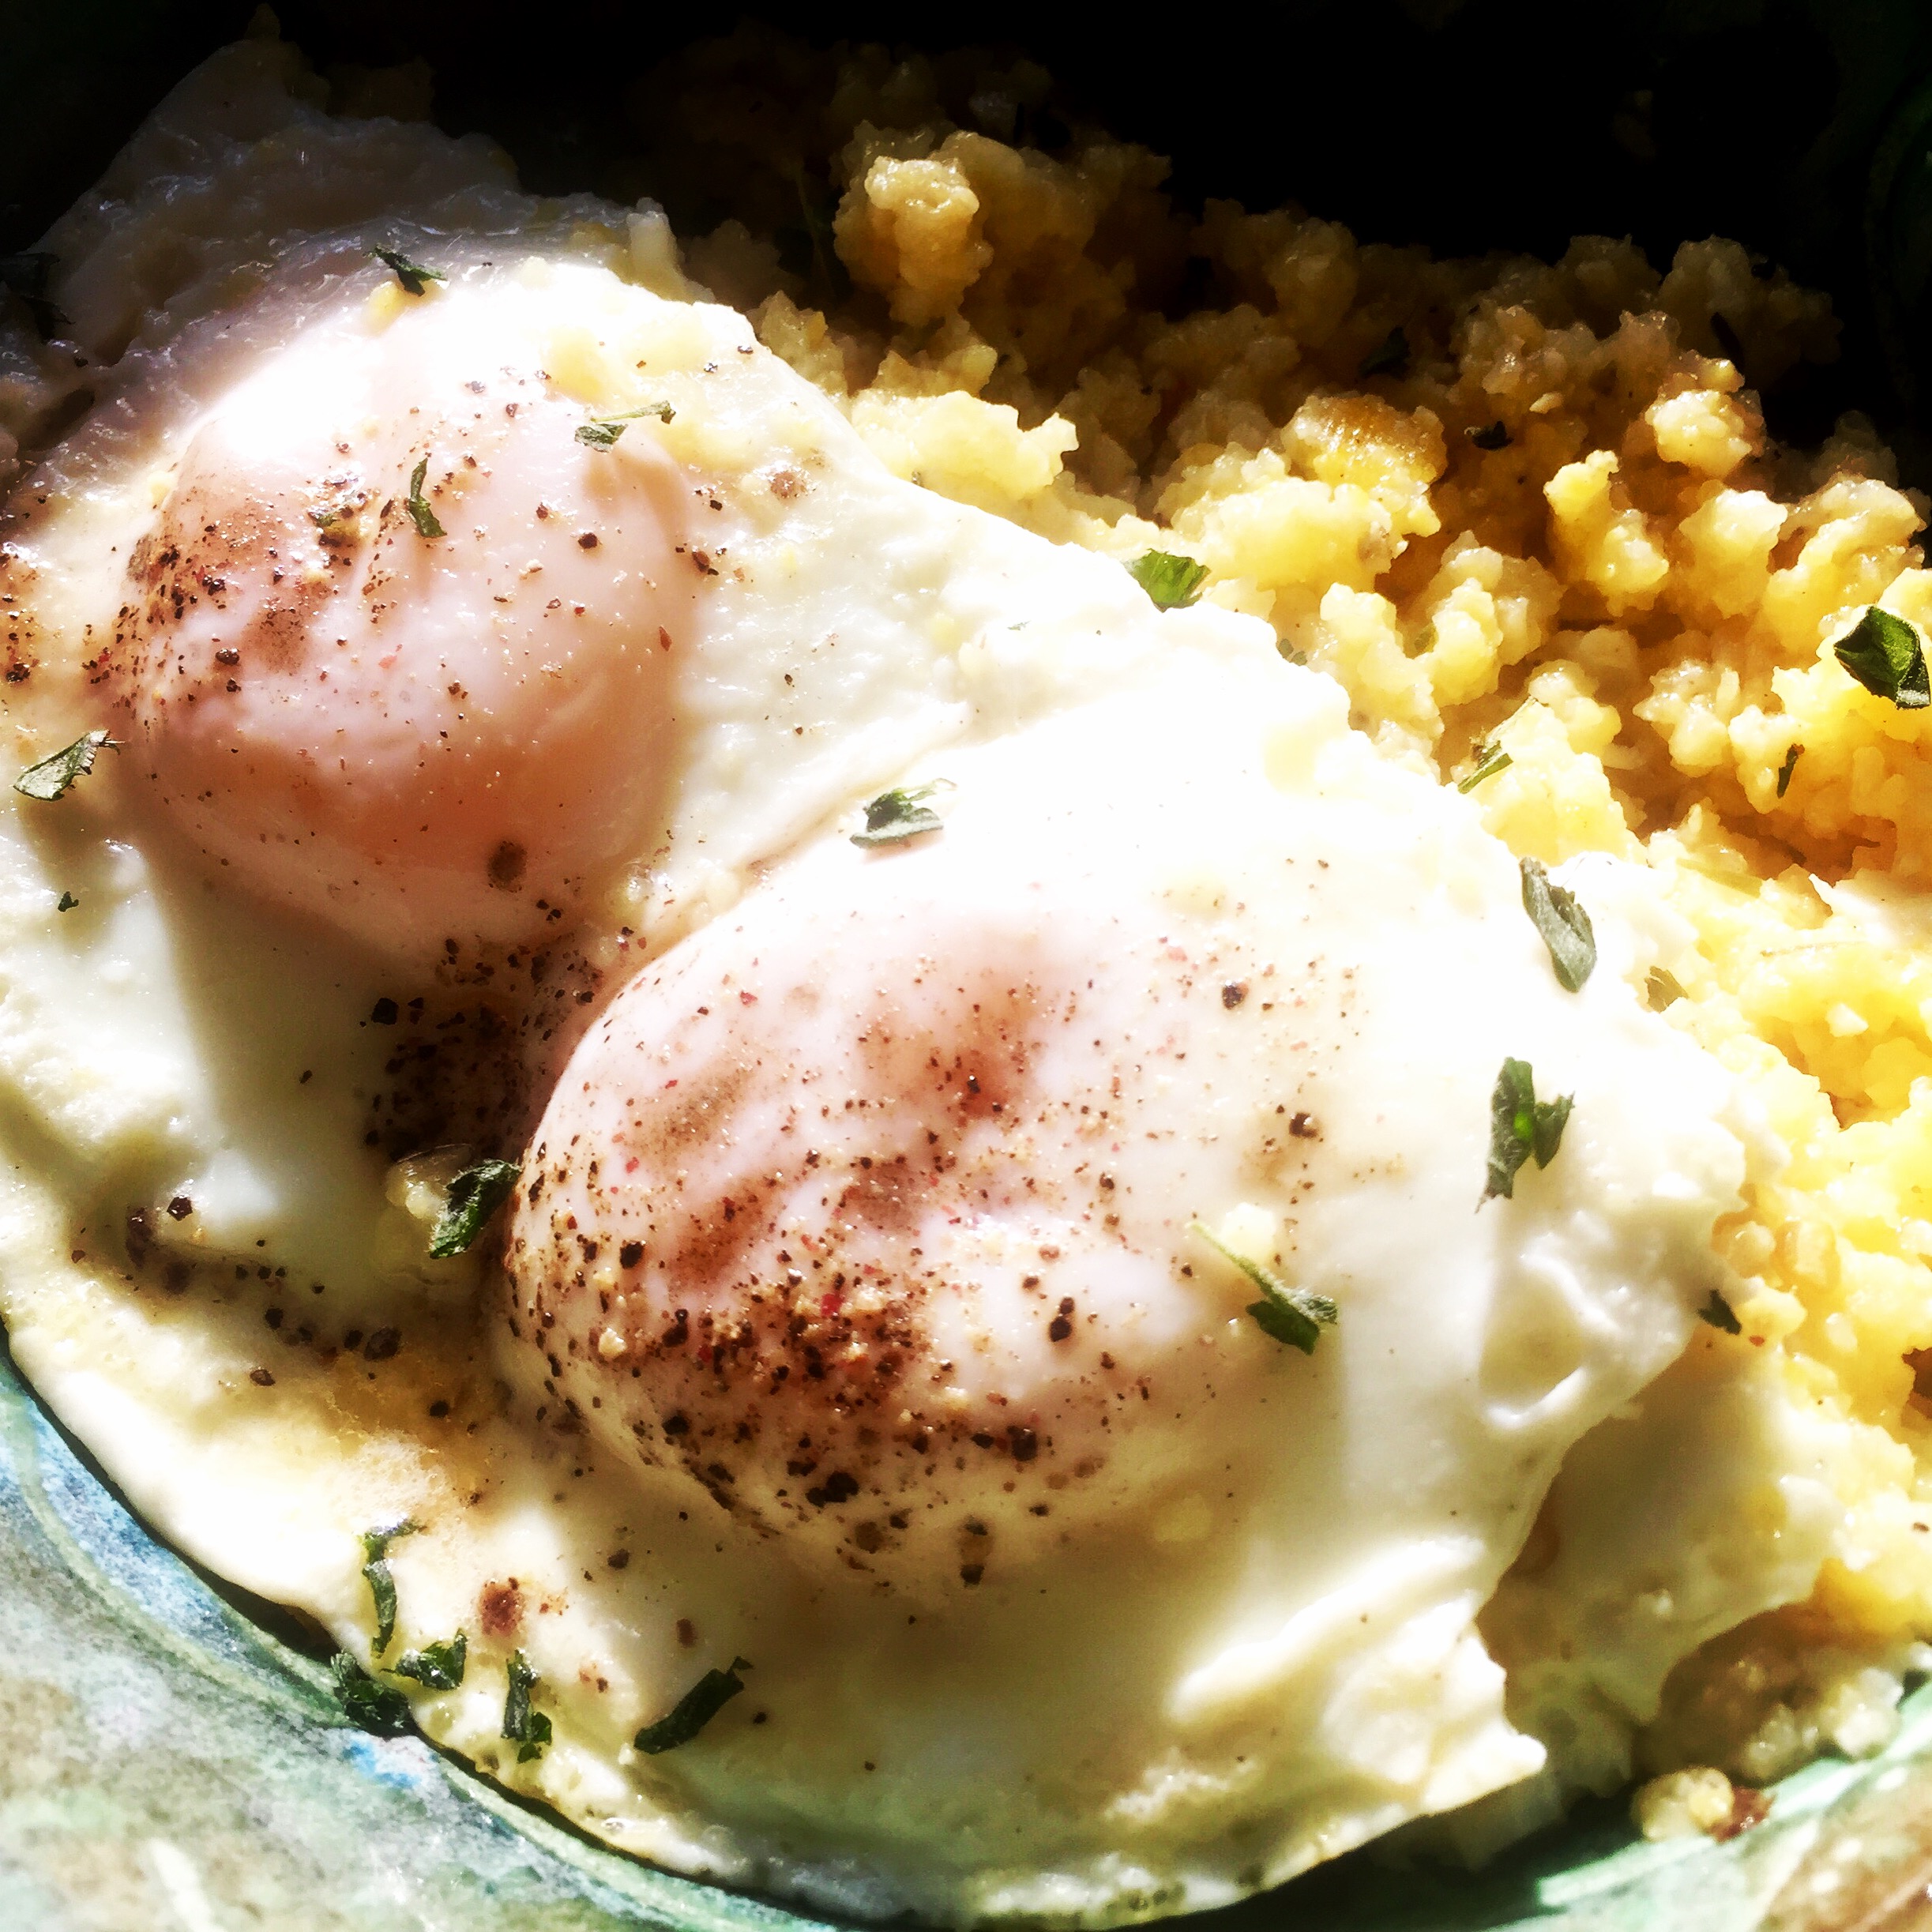 Sunny-side up local eggs with smoked sea salt and polenta